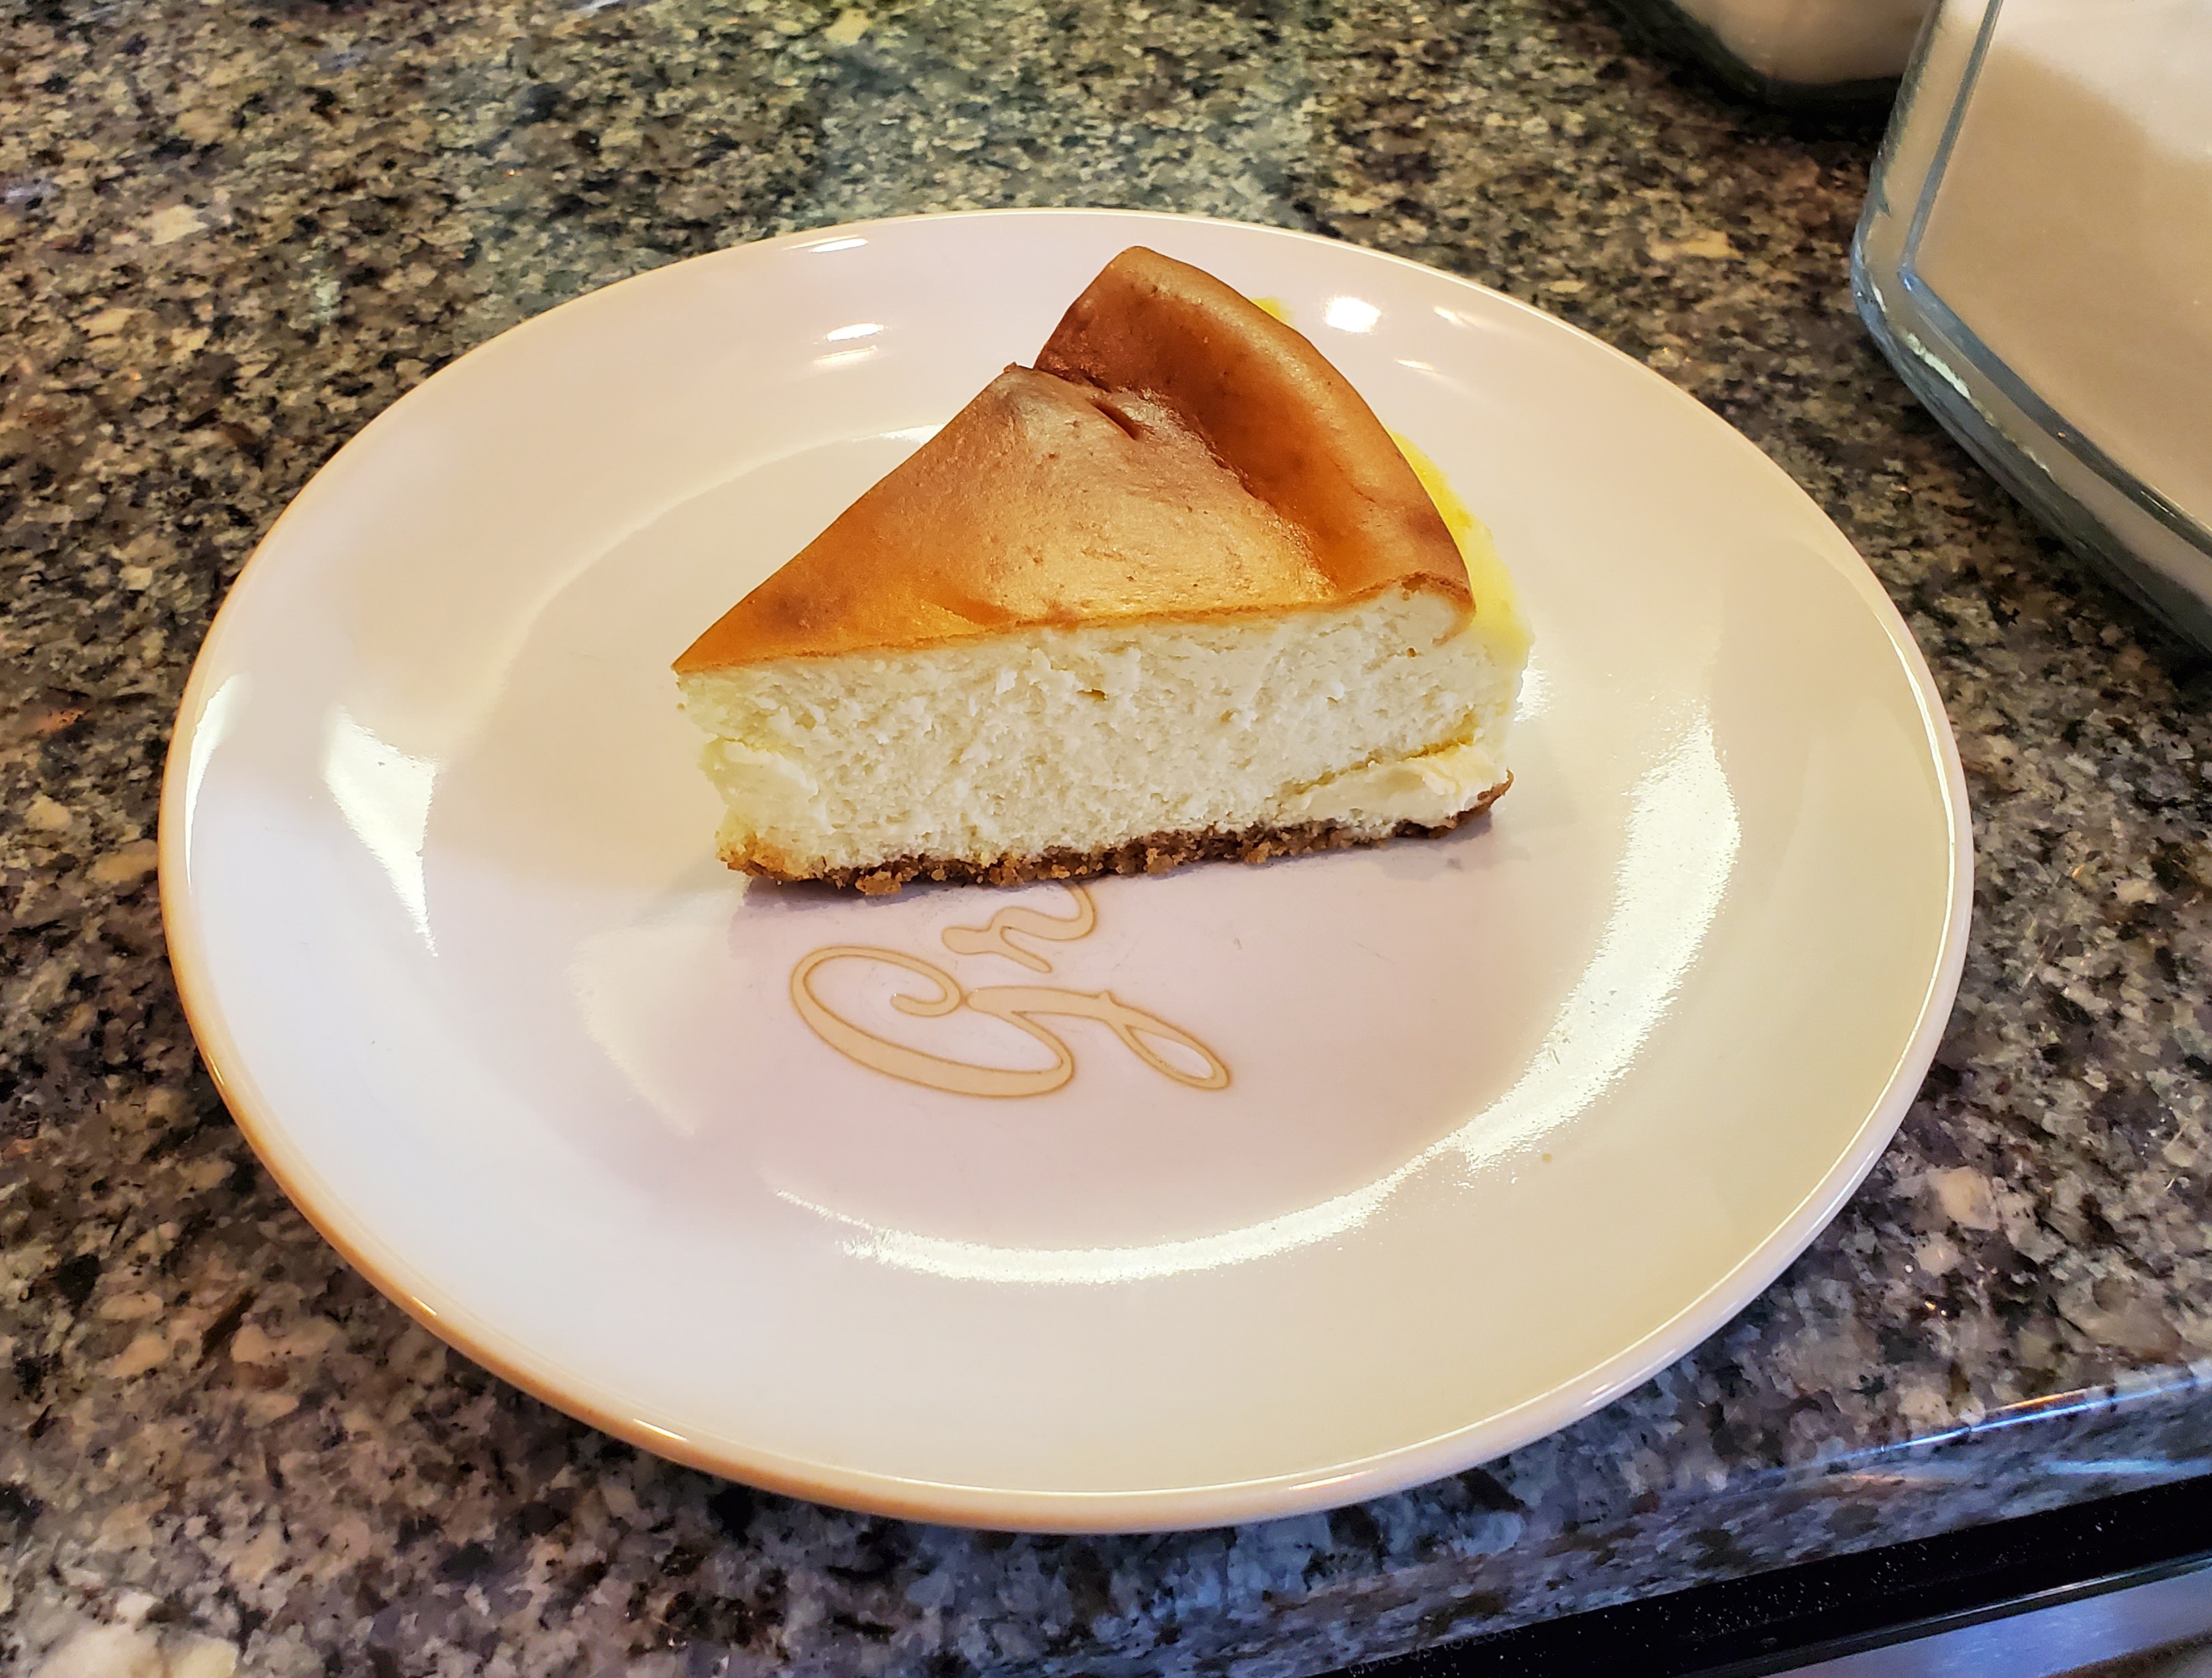 On a white plate, there is a NY cheesecake. Photo by Carl Busch.